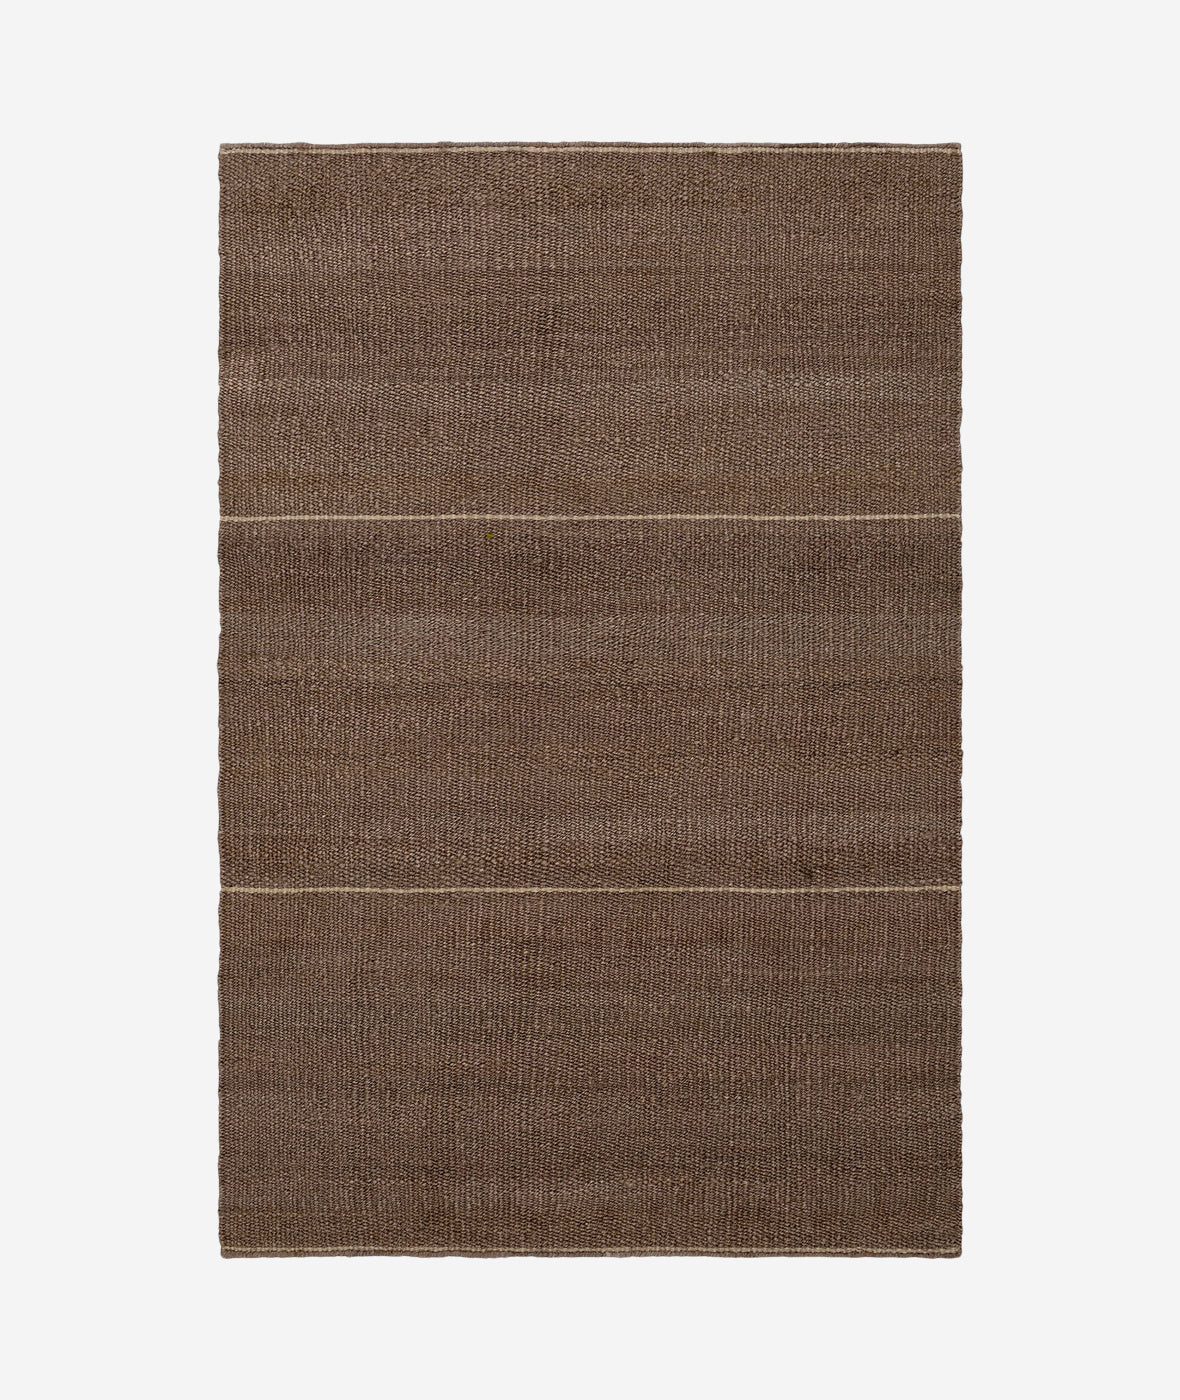 Acre Rug - More Options